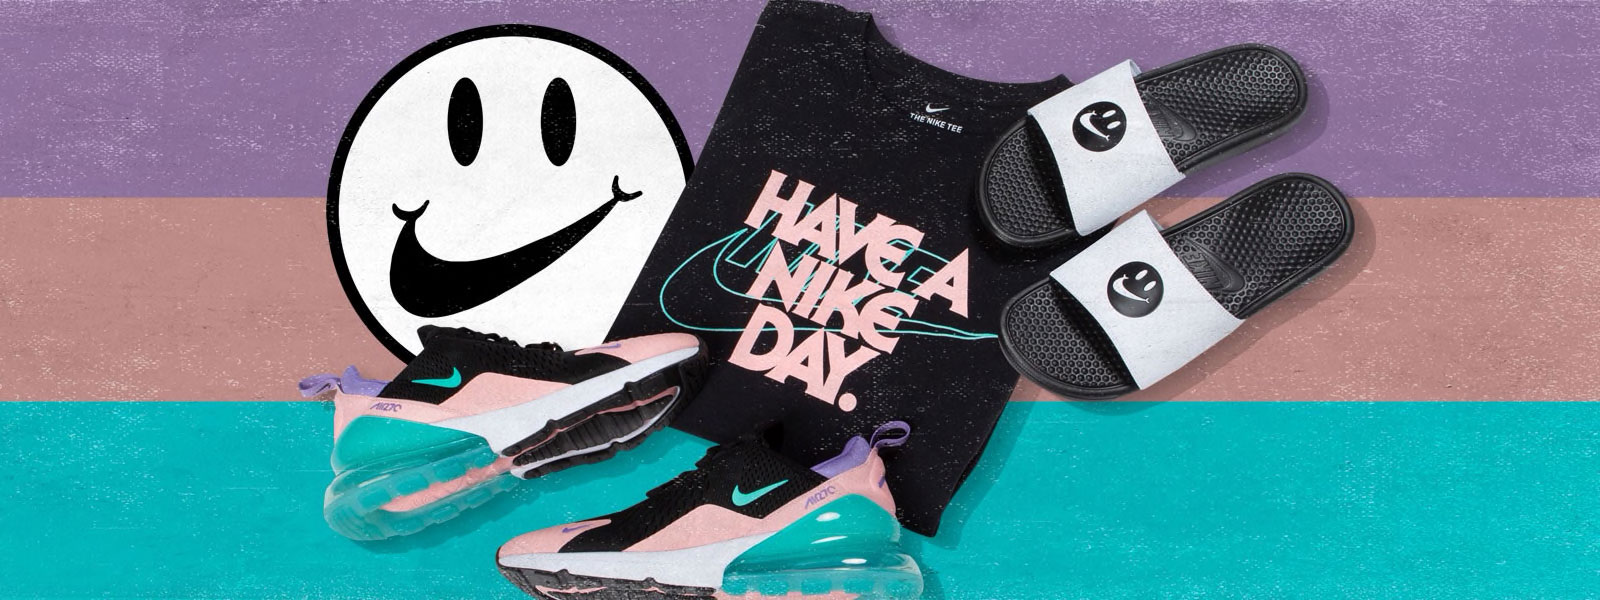 have-a-nike-daay-tee-shirts-and-shoes